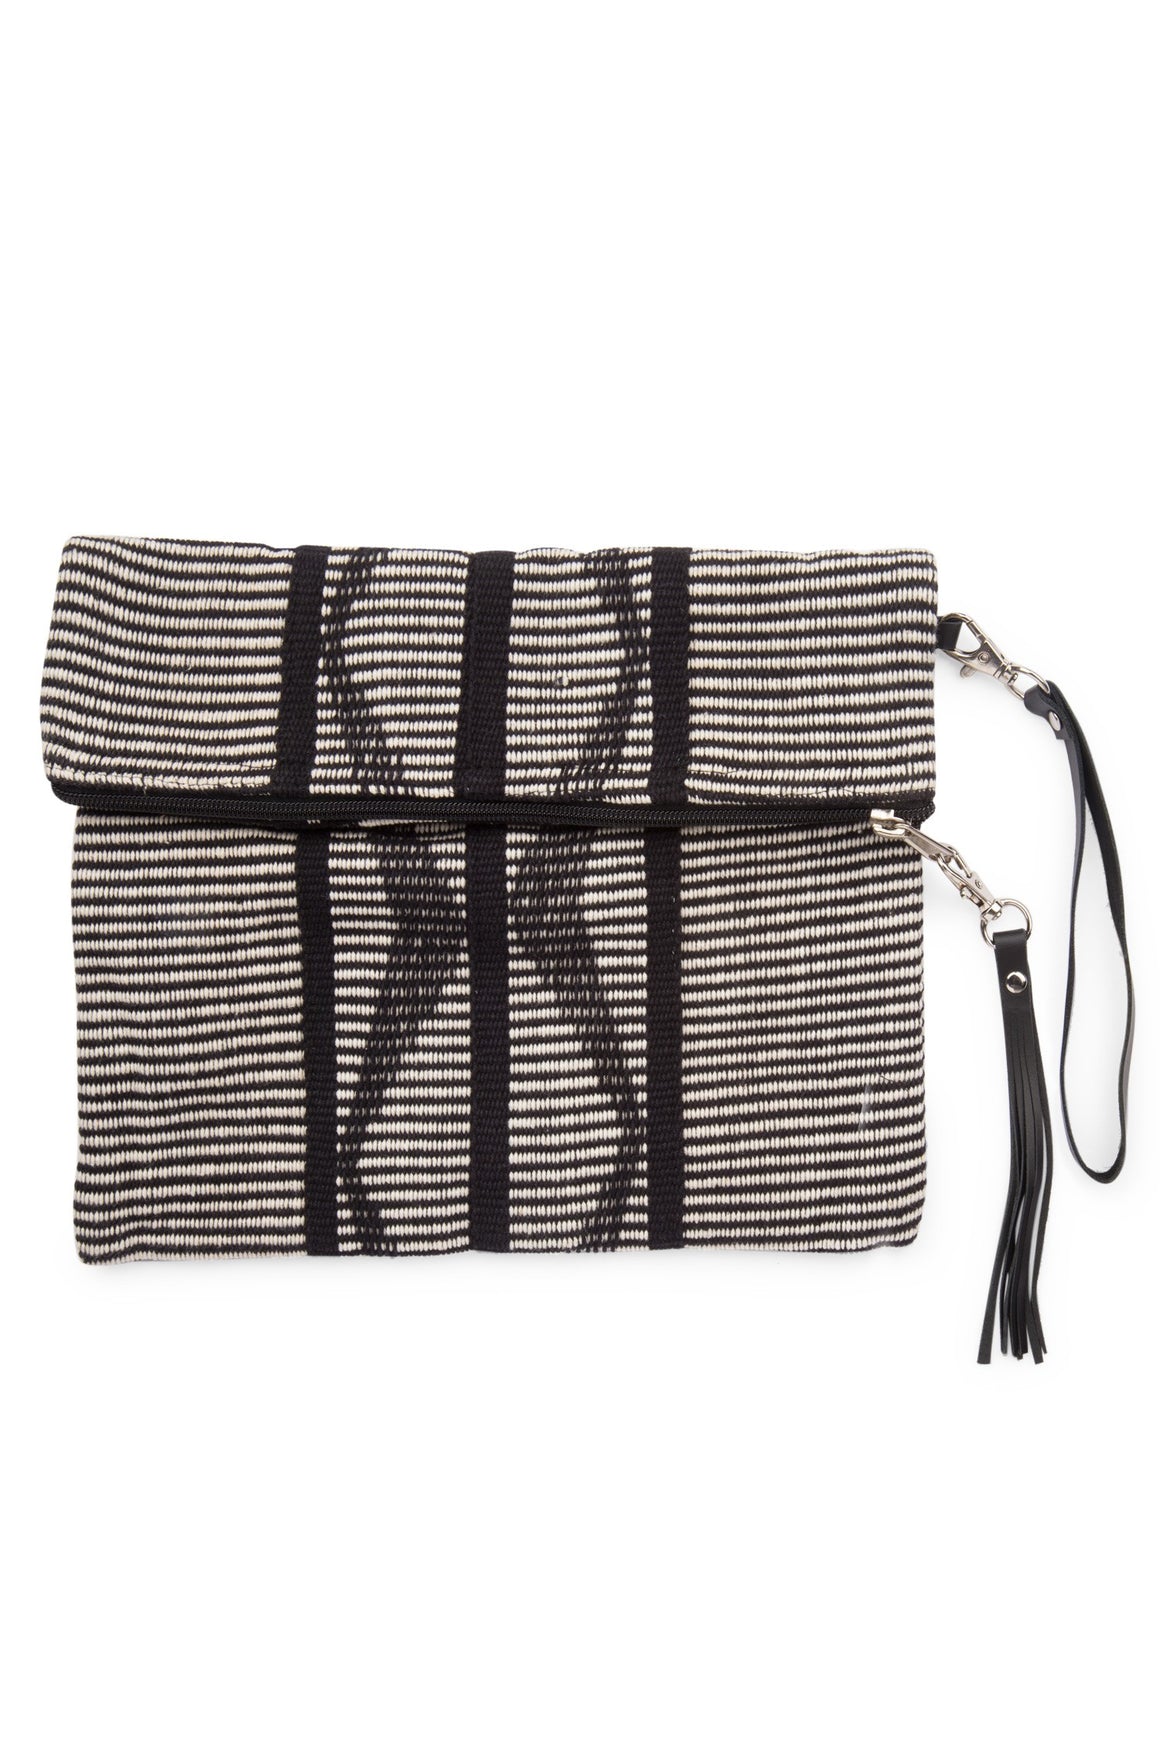 Woven Wave Foldover Clutch Handcrafted in India